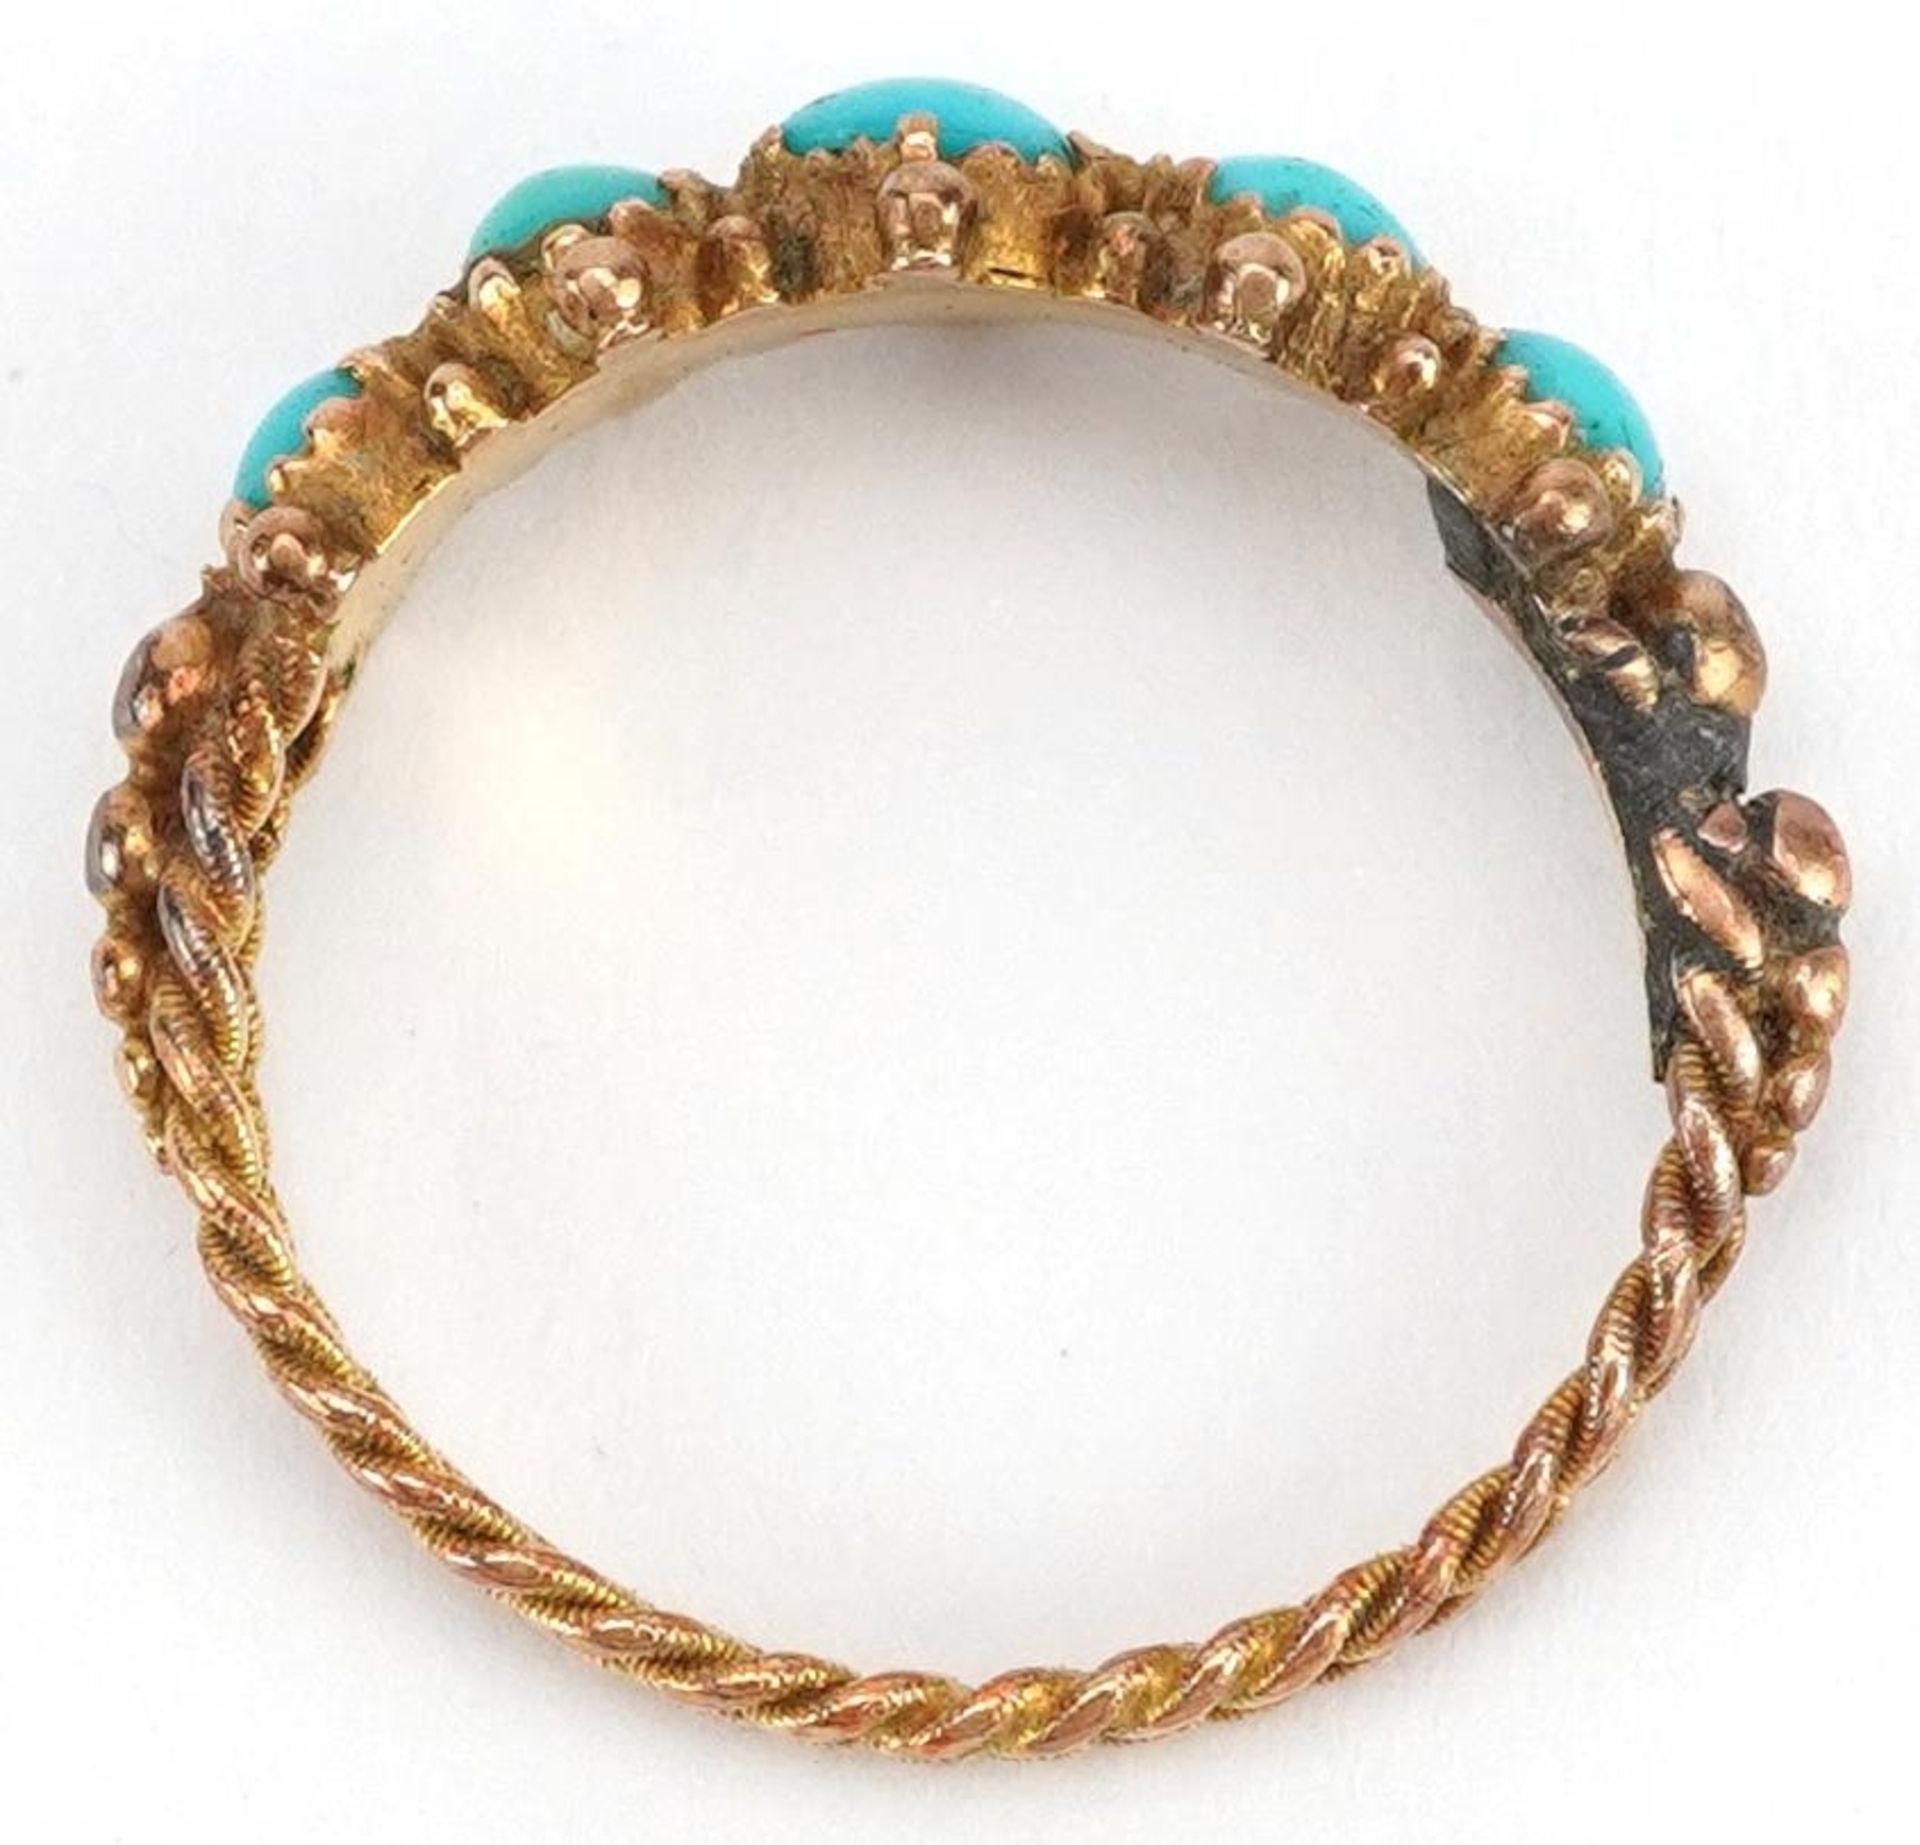 Antique unmarked gold cabochon turquoise five stone ring with ornate setting and rope twist design - Image 3 of 4